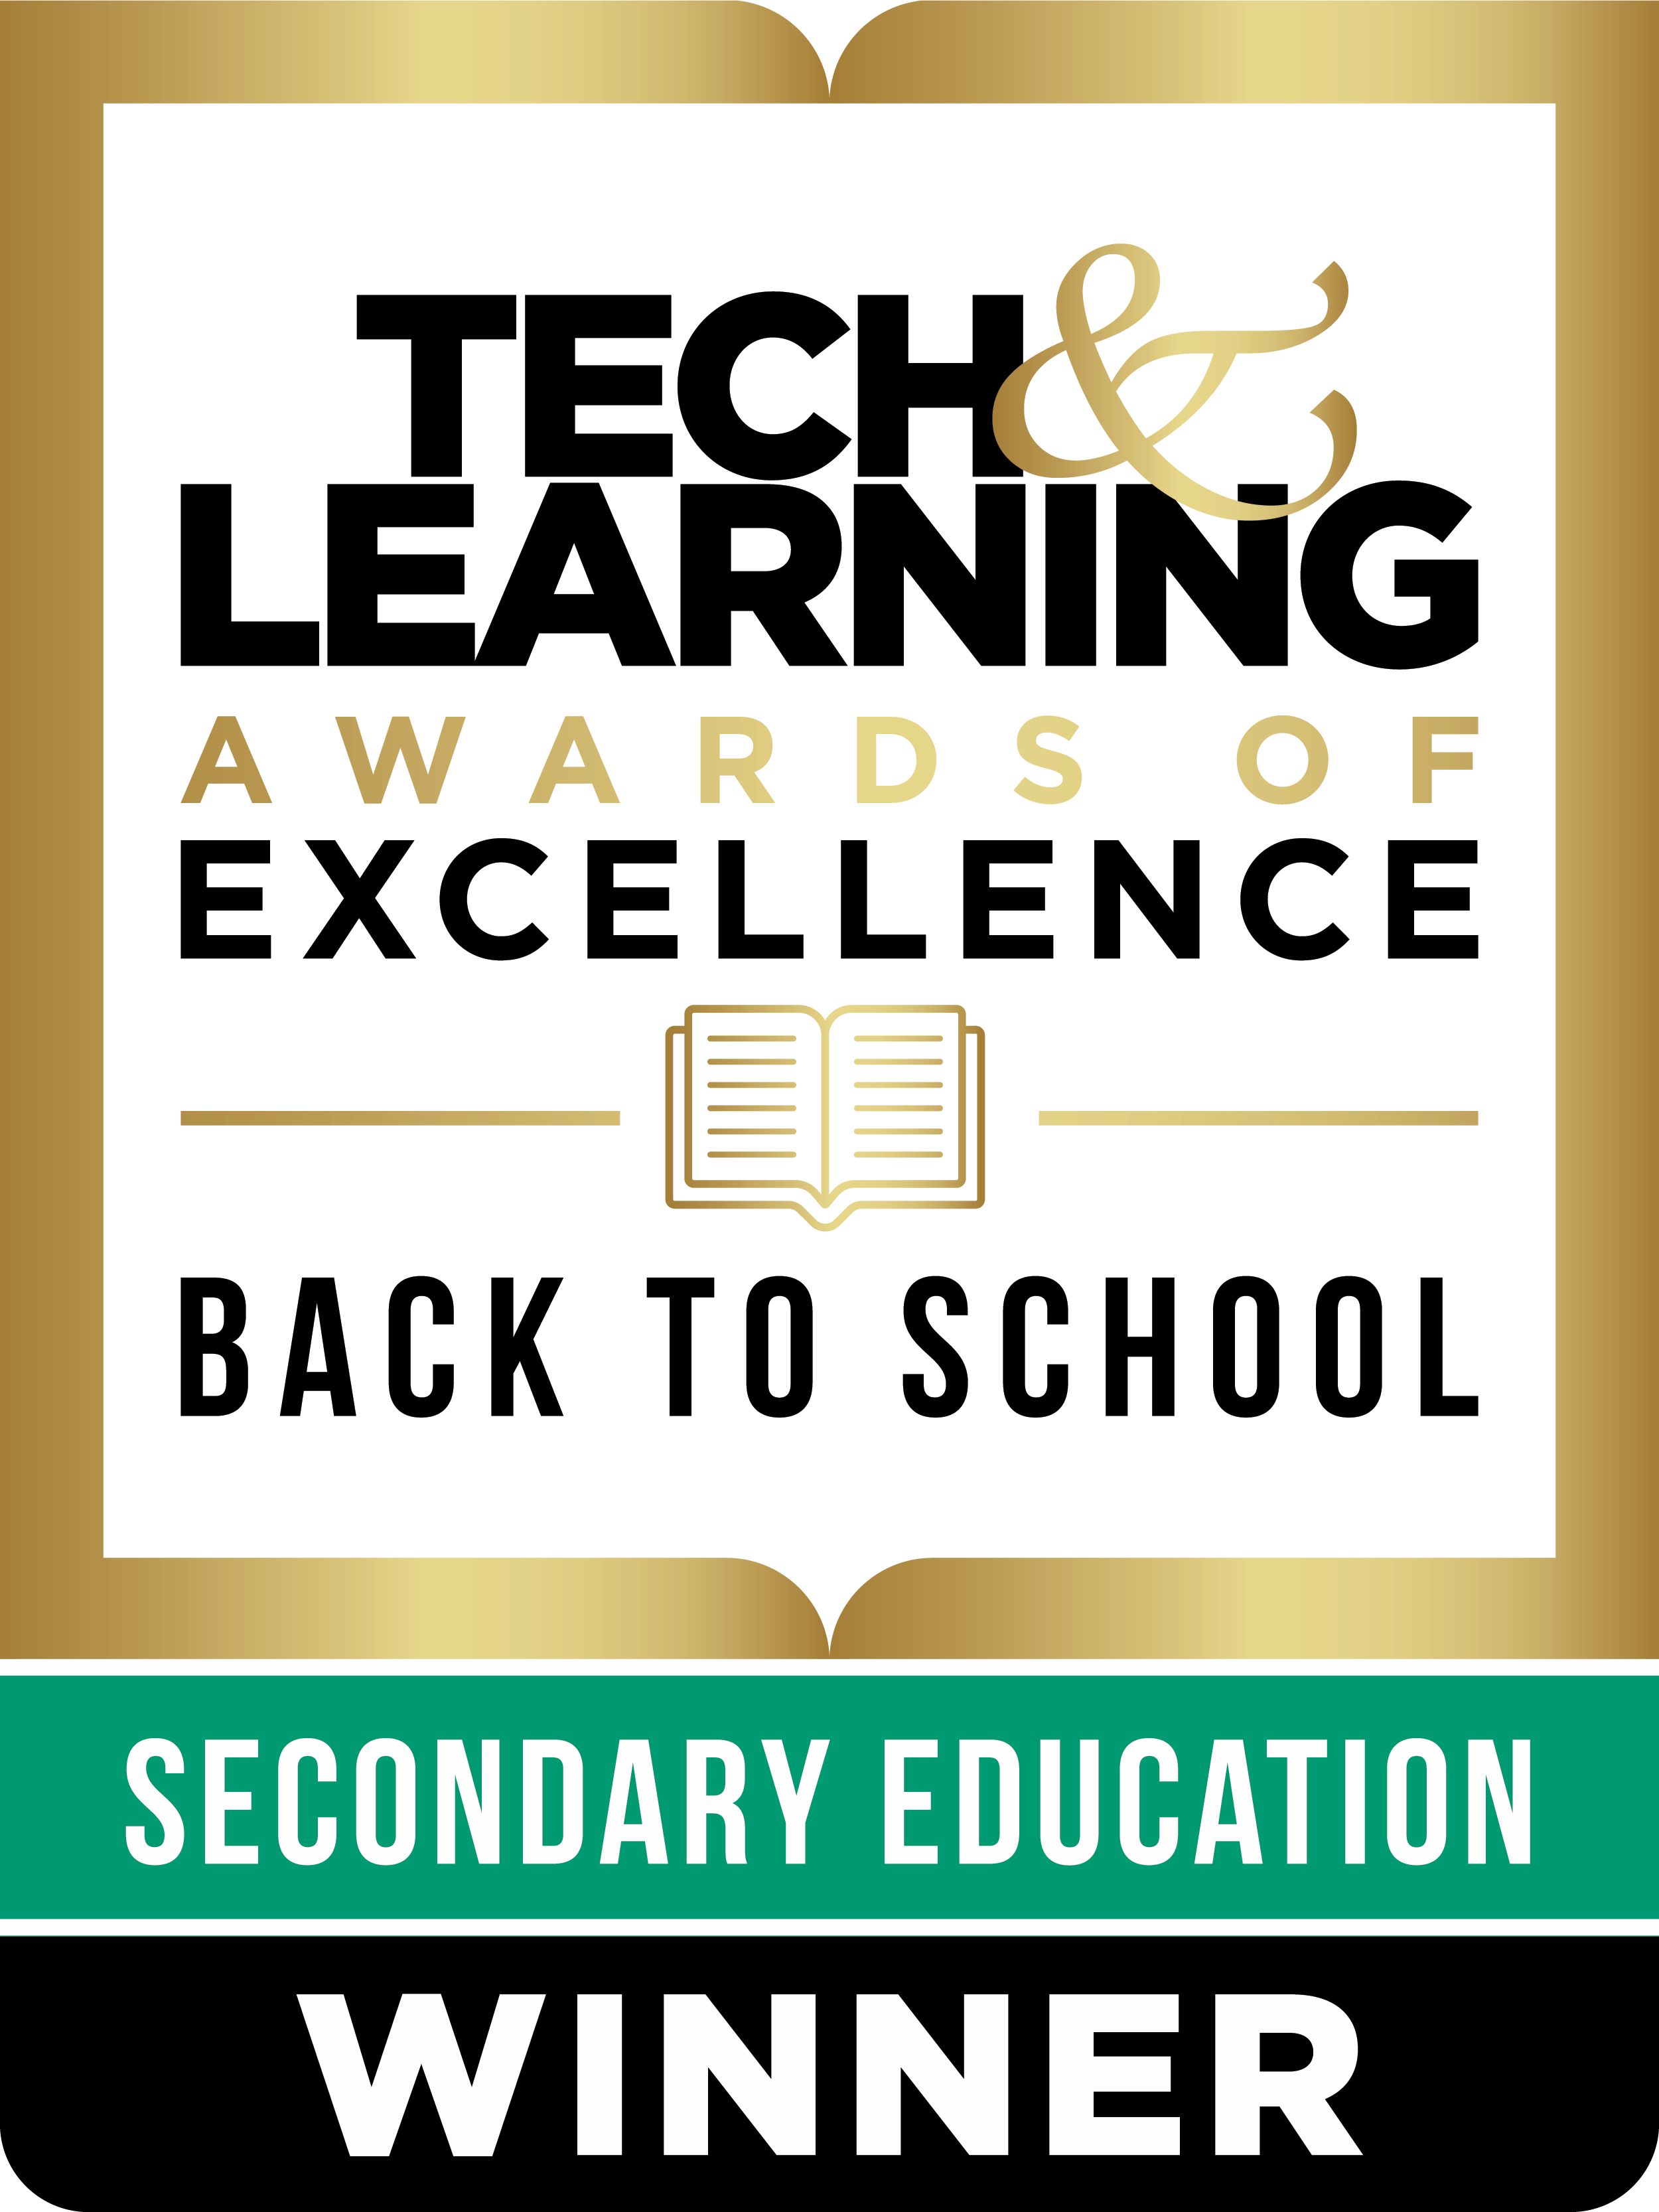 Tech & Learning Awards of Excellence Back to School- Secondary Education